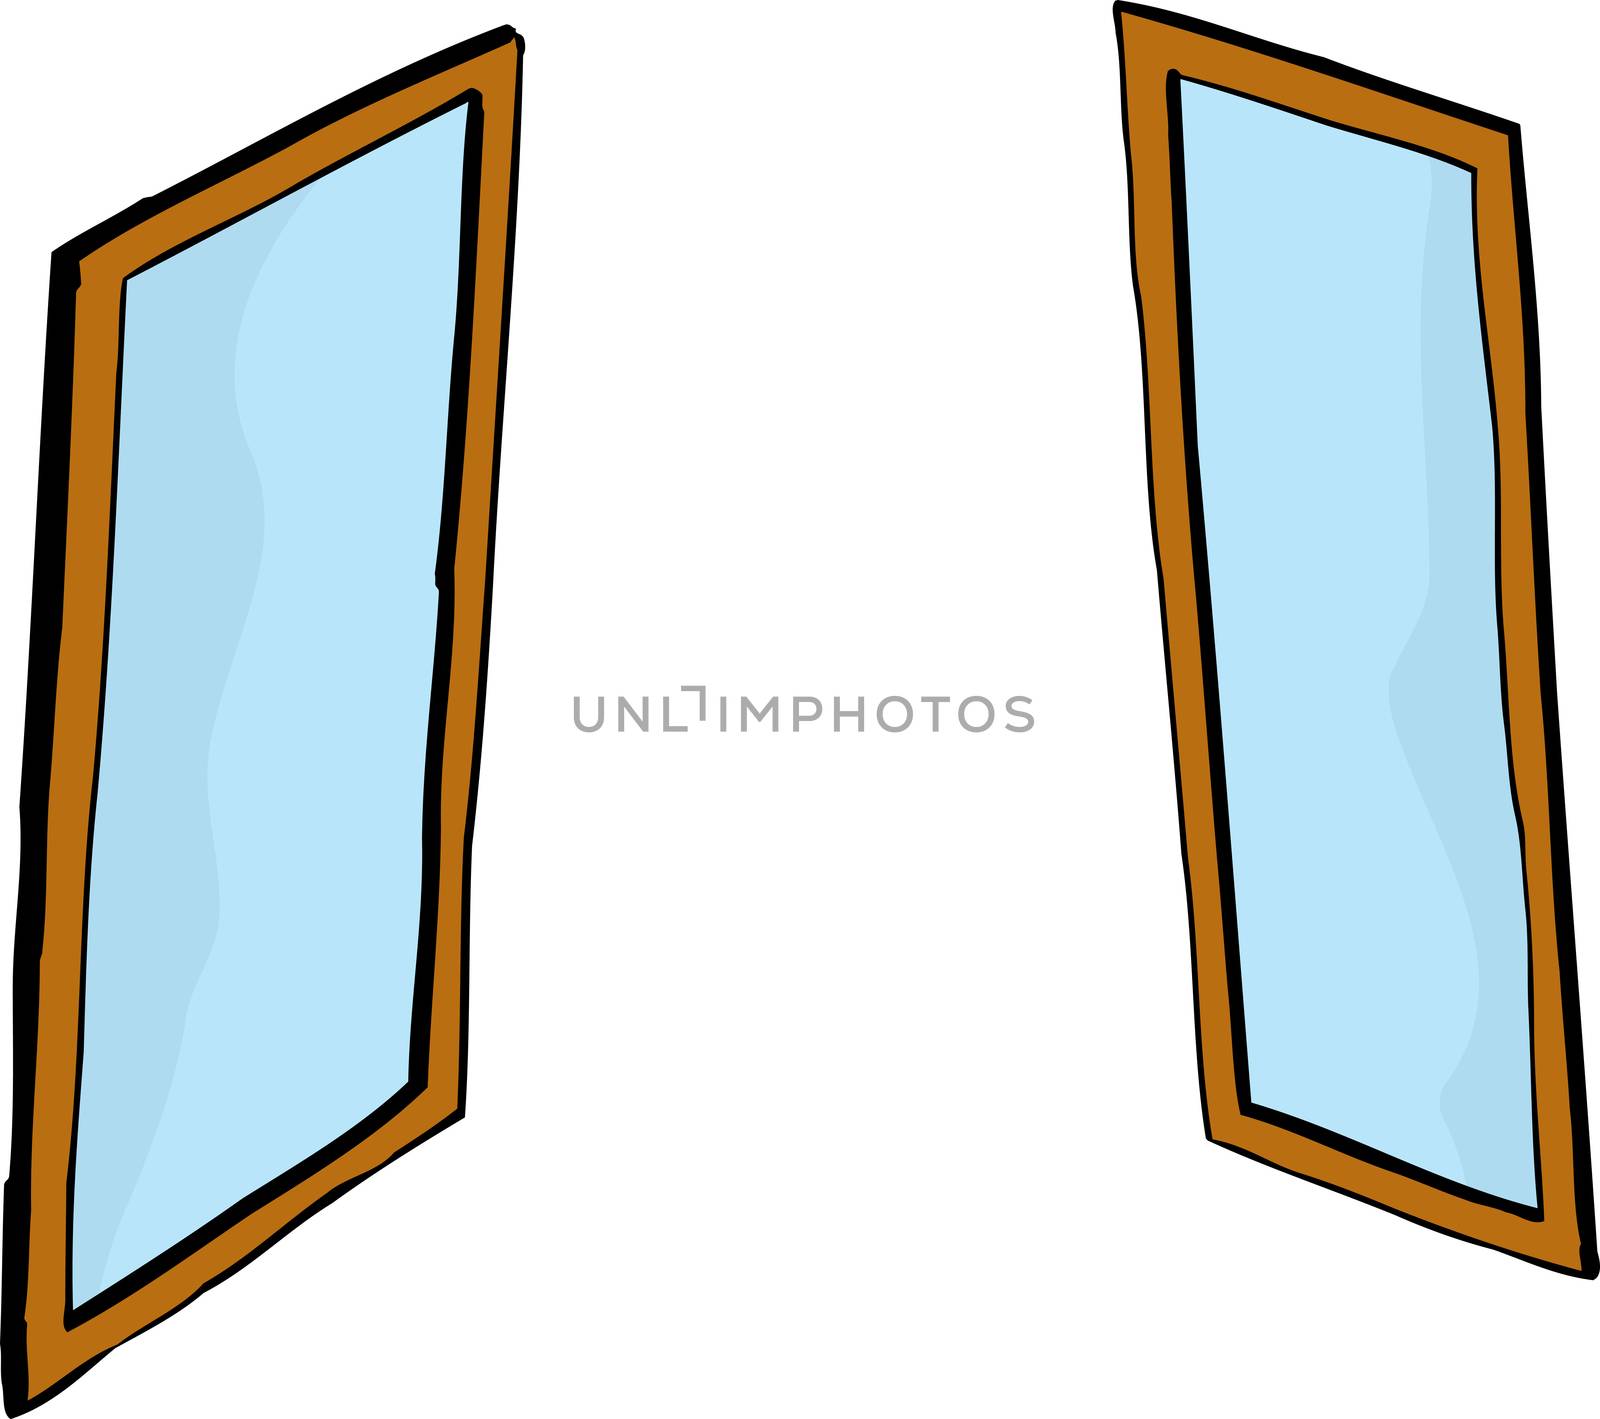 Pair of facing windows or mirrors over white background